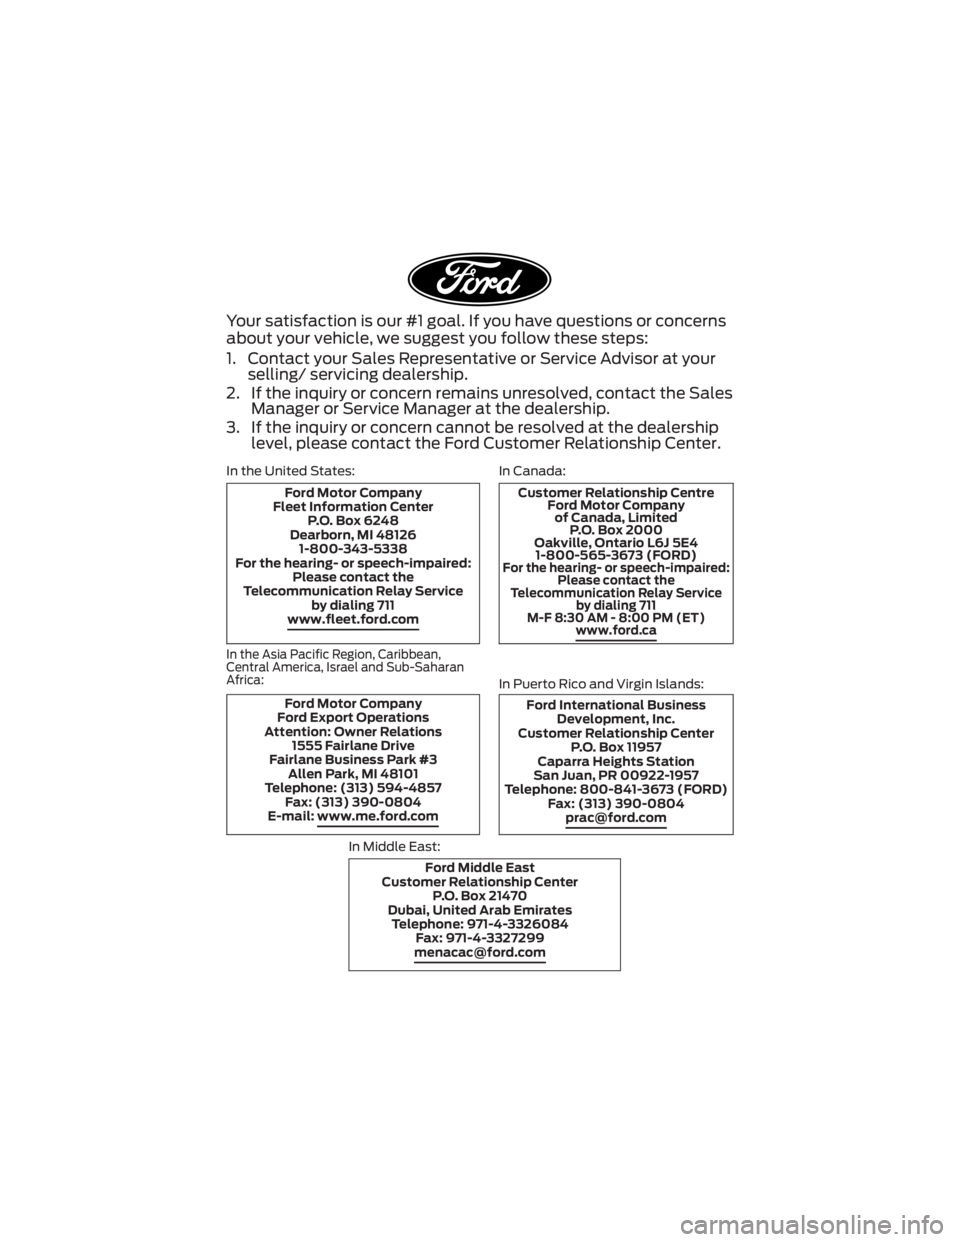 FORD F-53 2022  Warranty Guide Your satisfaction is our #1 goal. If you have questions or concerns
about your vehicle, we suggest you follow these steps:
1. Contact your Sales Representative or Service Advisor at yourselling/ servi